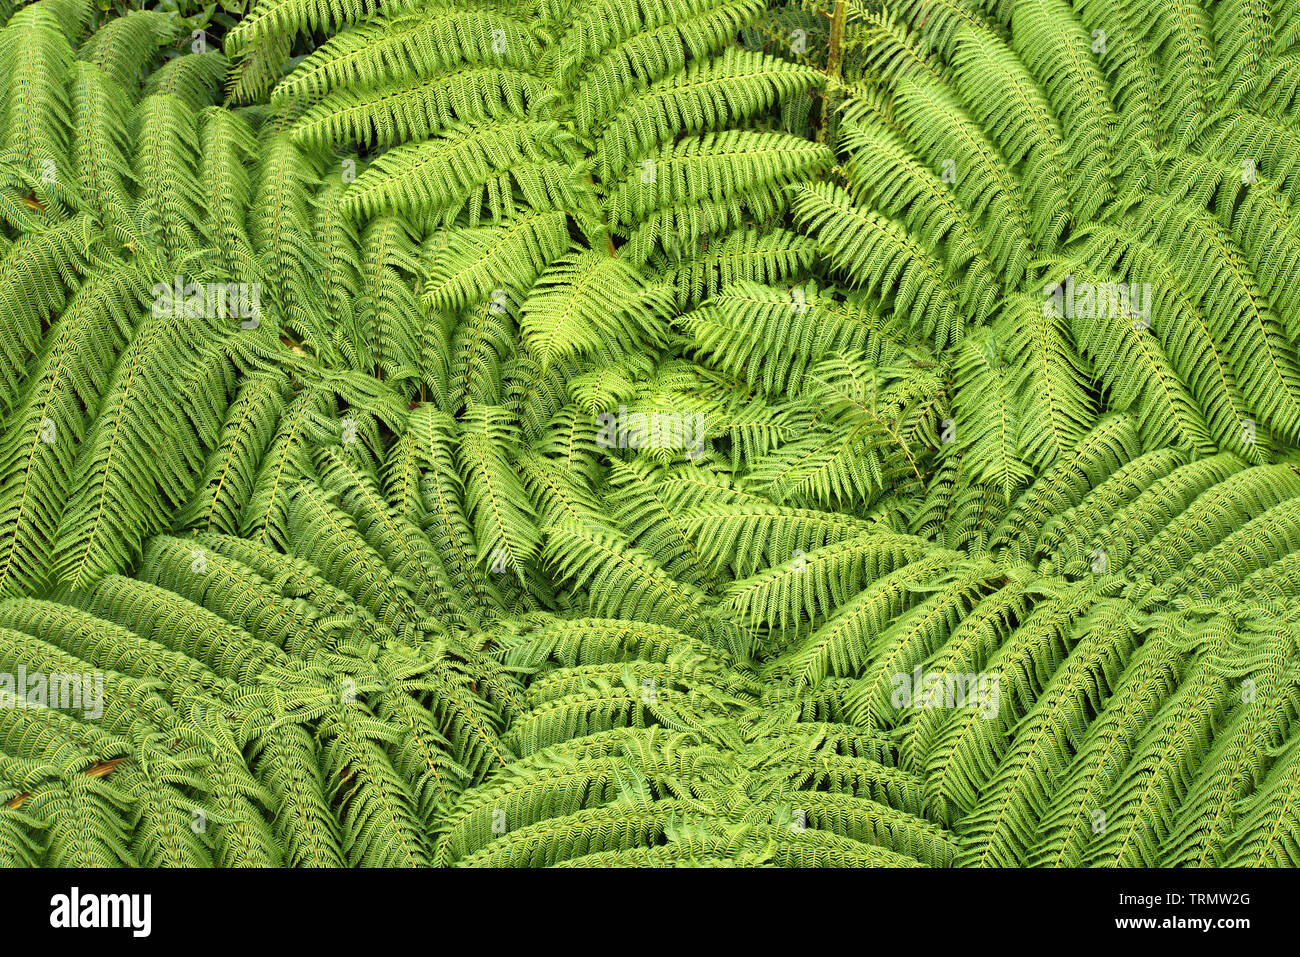 New Zealand endemic tree fern (Cyathea Smithii) from above, native forest natural background Stock Photo